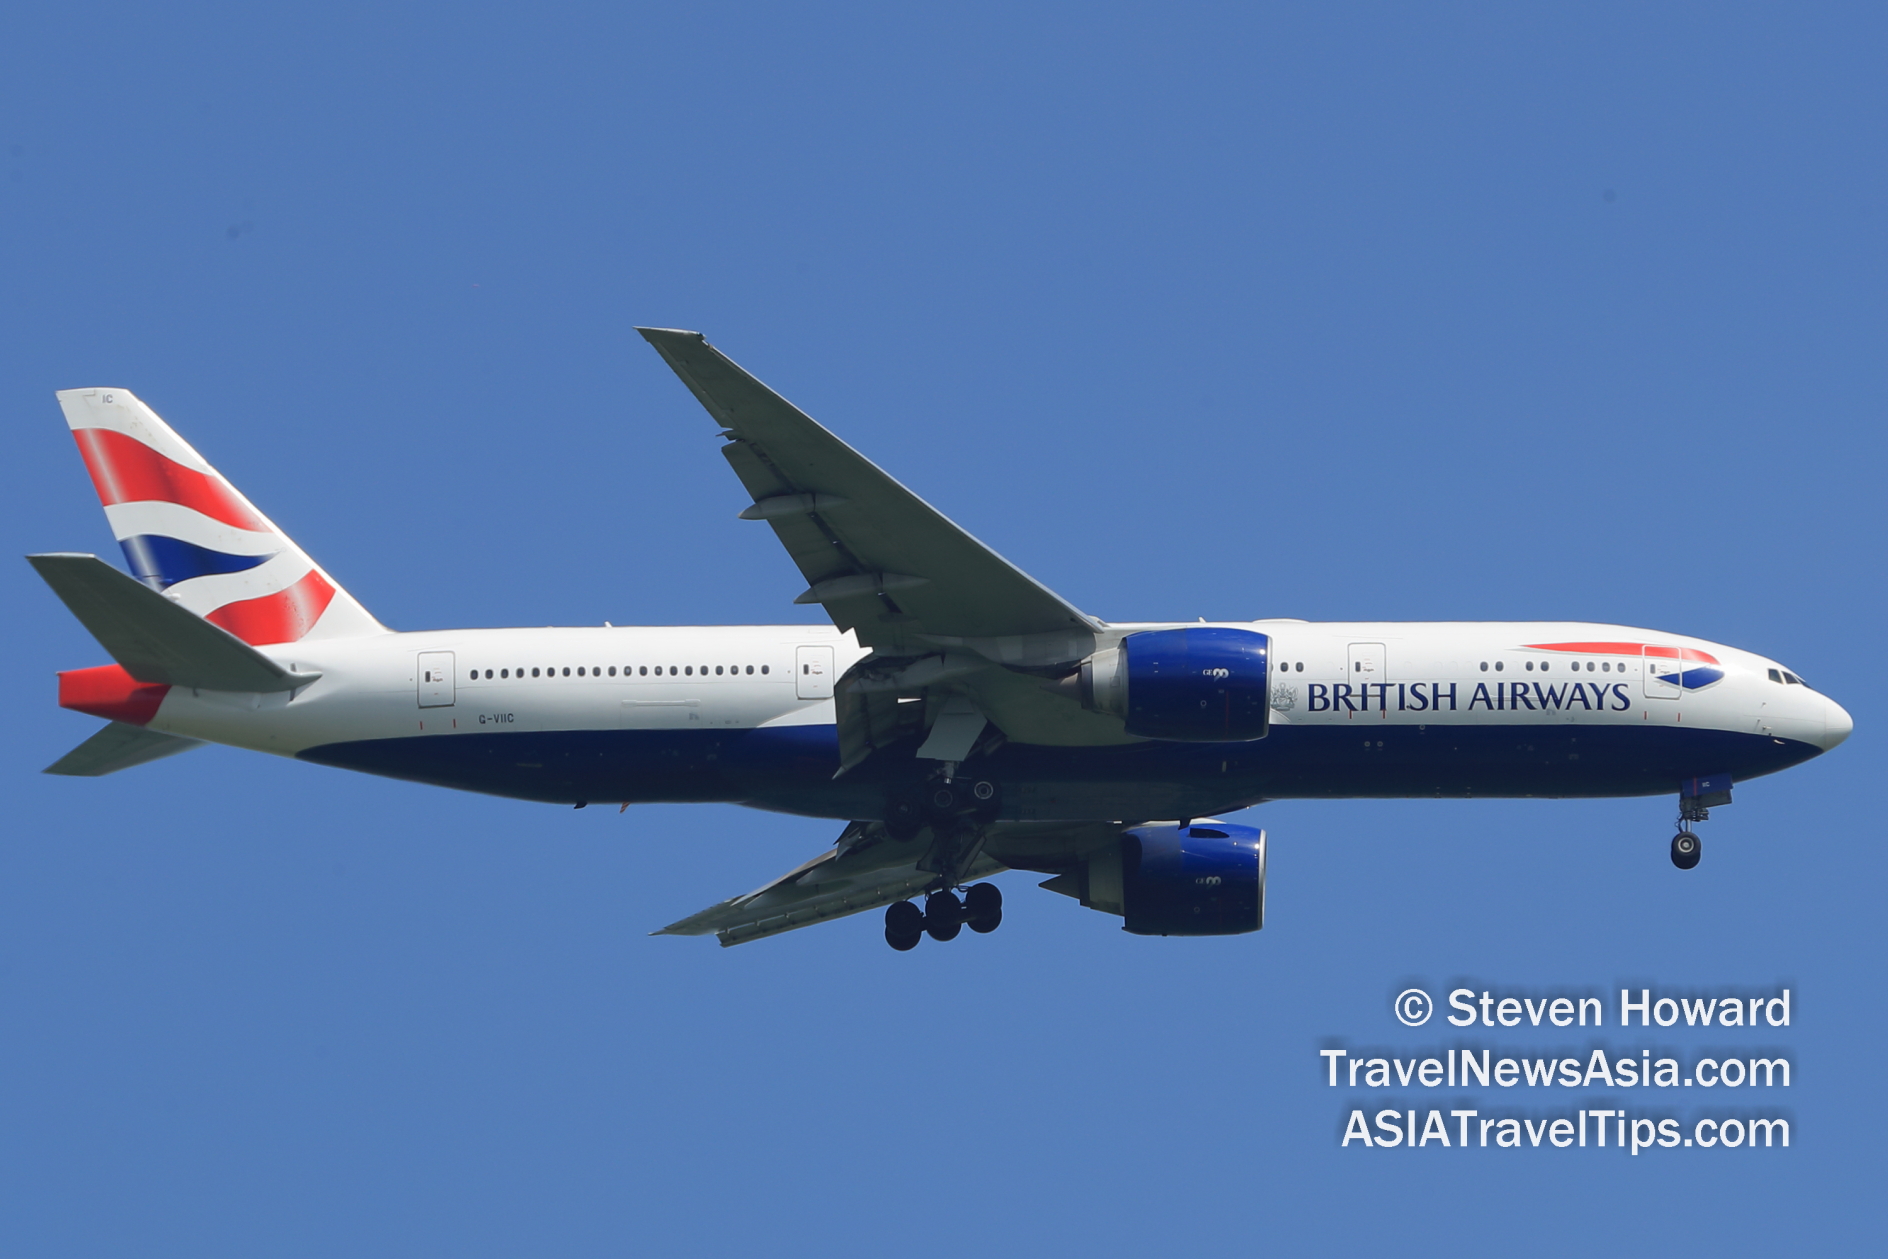 British Airways Boeing 777 reg: G-VIIC. Picture by Steven Howard of TravelNewsAsia.com Click to enlarge.